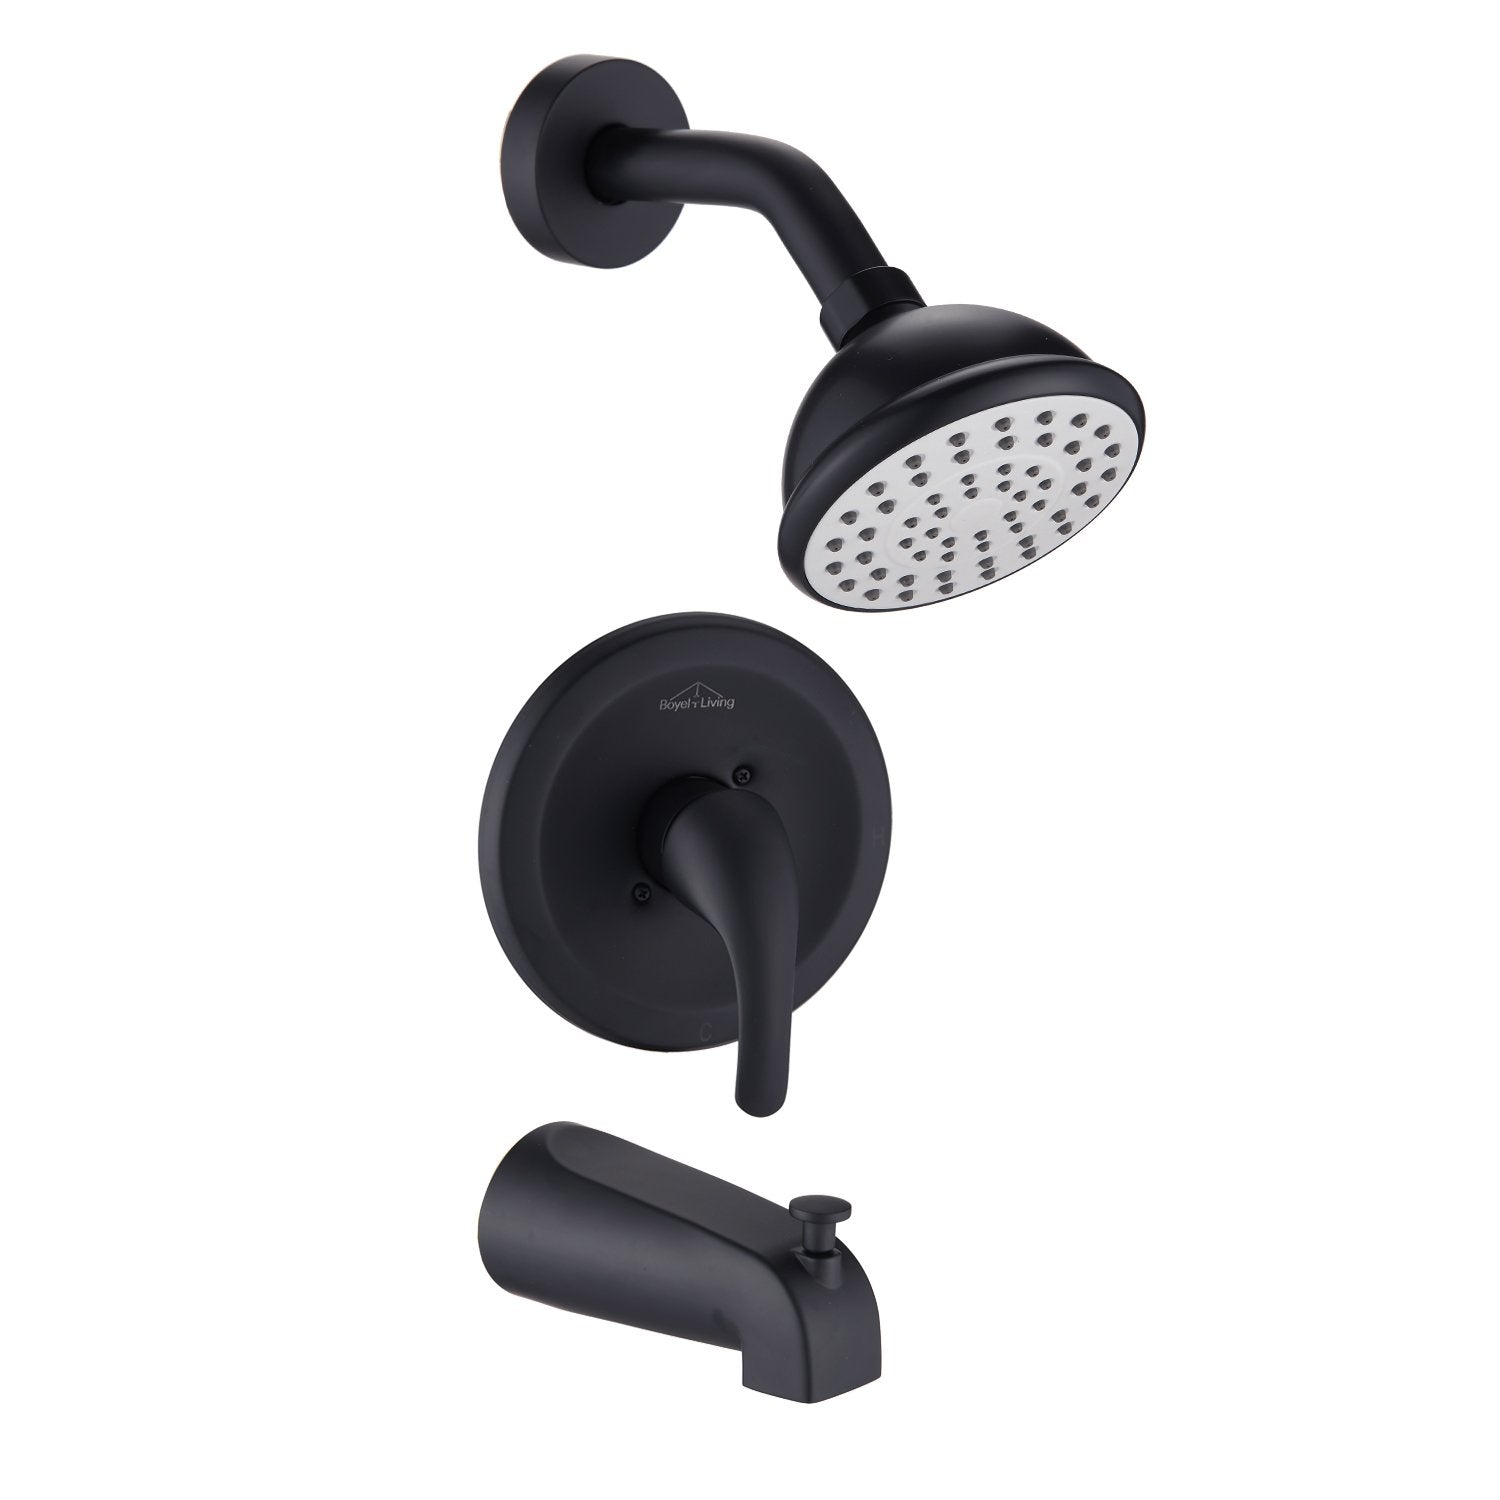 Single-Handle 4 in. Tub and Shower Faucet Set, Matte Black - Alipuinc